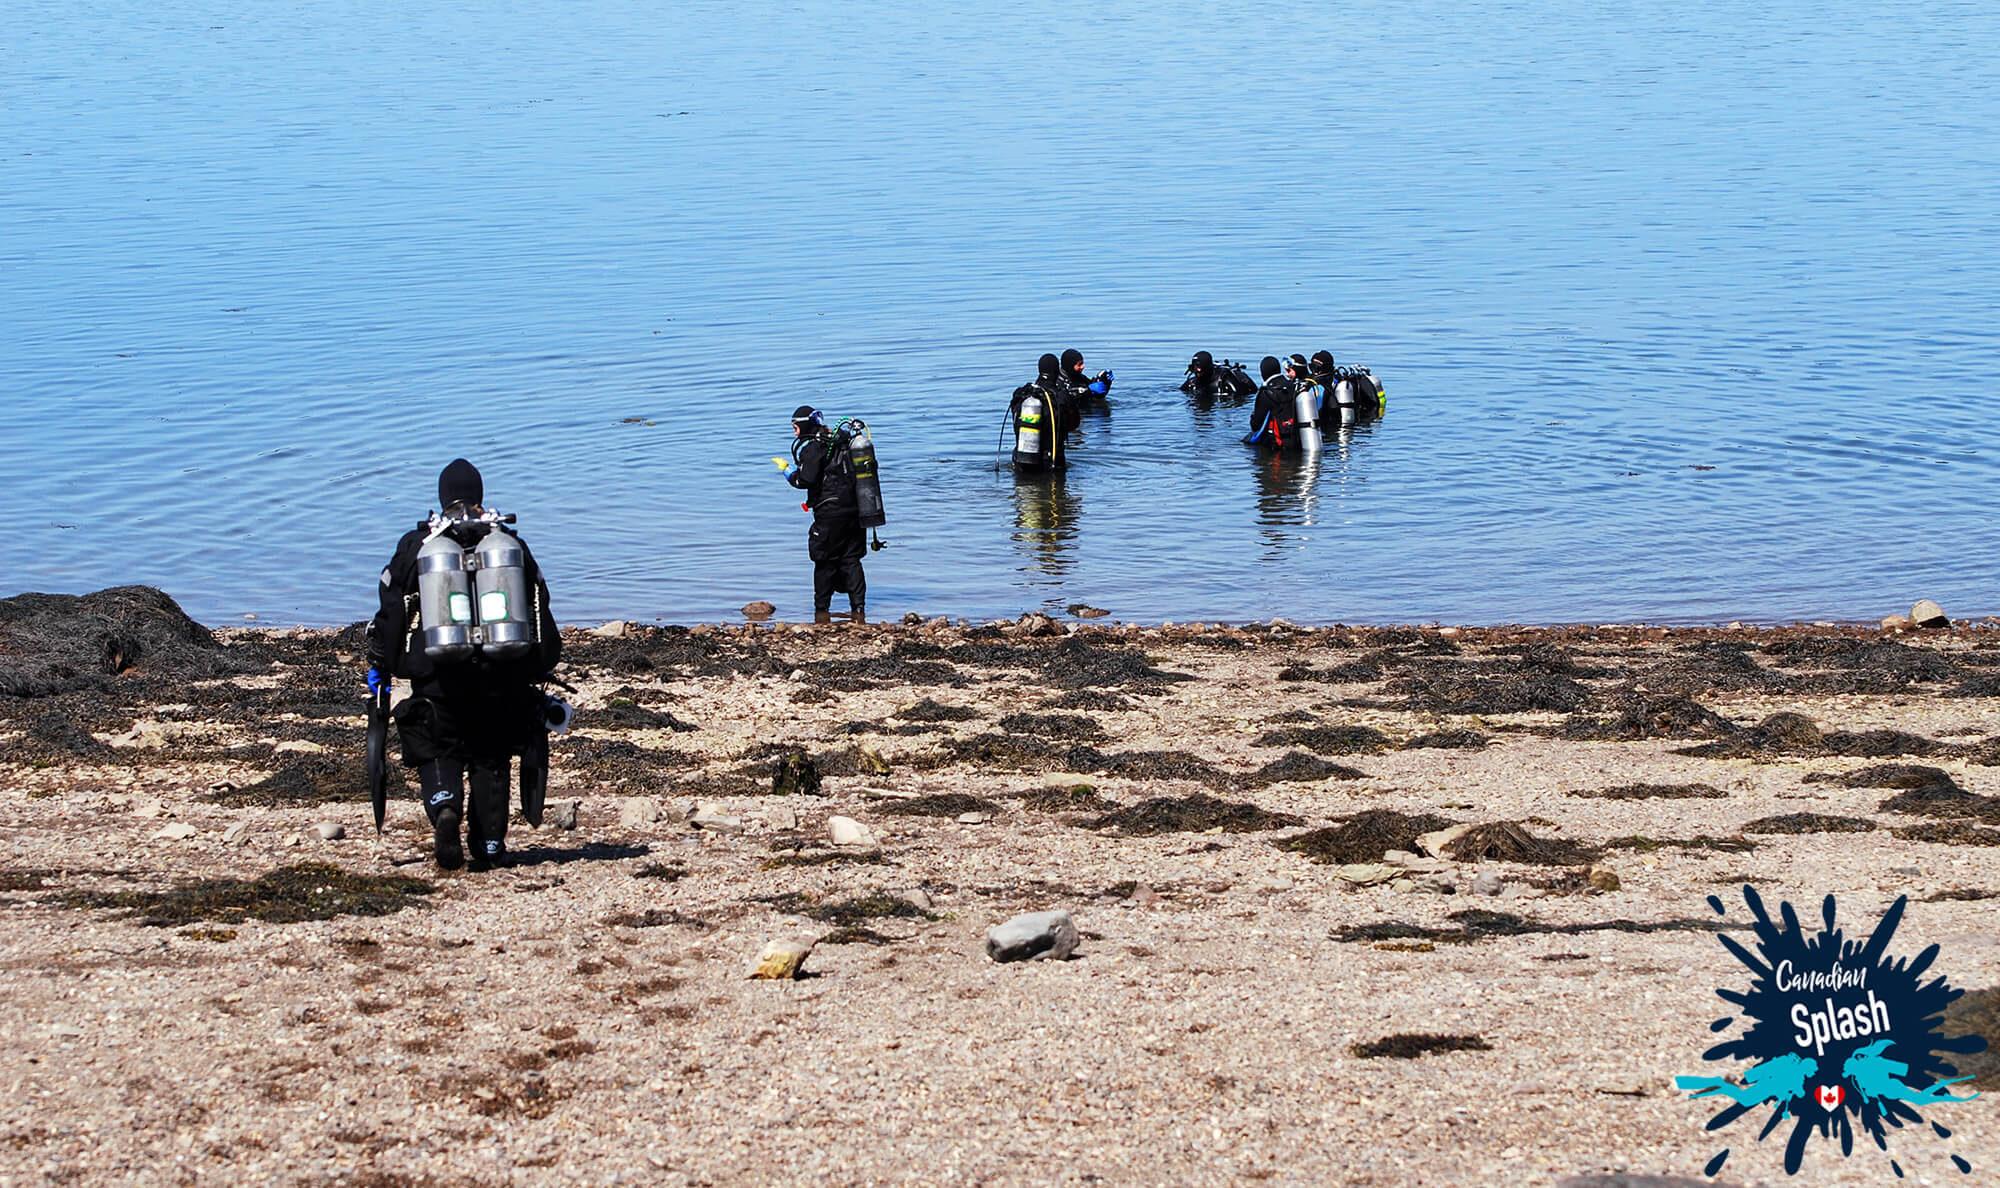 A Group Of Scuba Divers Heading Into The Water At Cancat Beach On Deer Island, New Brunswick, Canadian Splash Scuba Diving